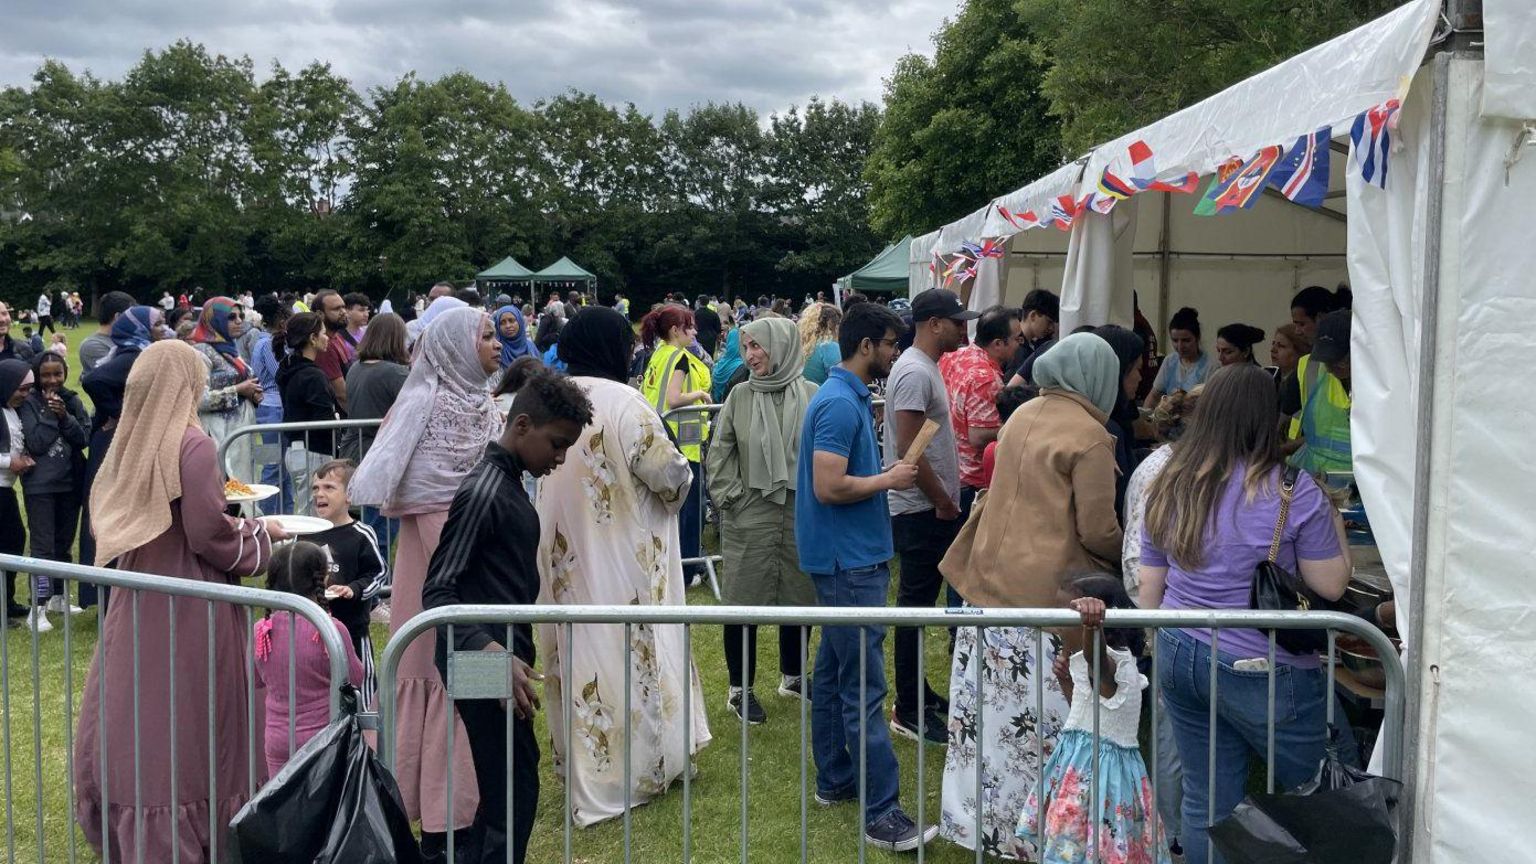 The refugee picnic was held at Ulidia playing fields in Belfast